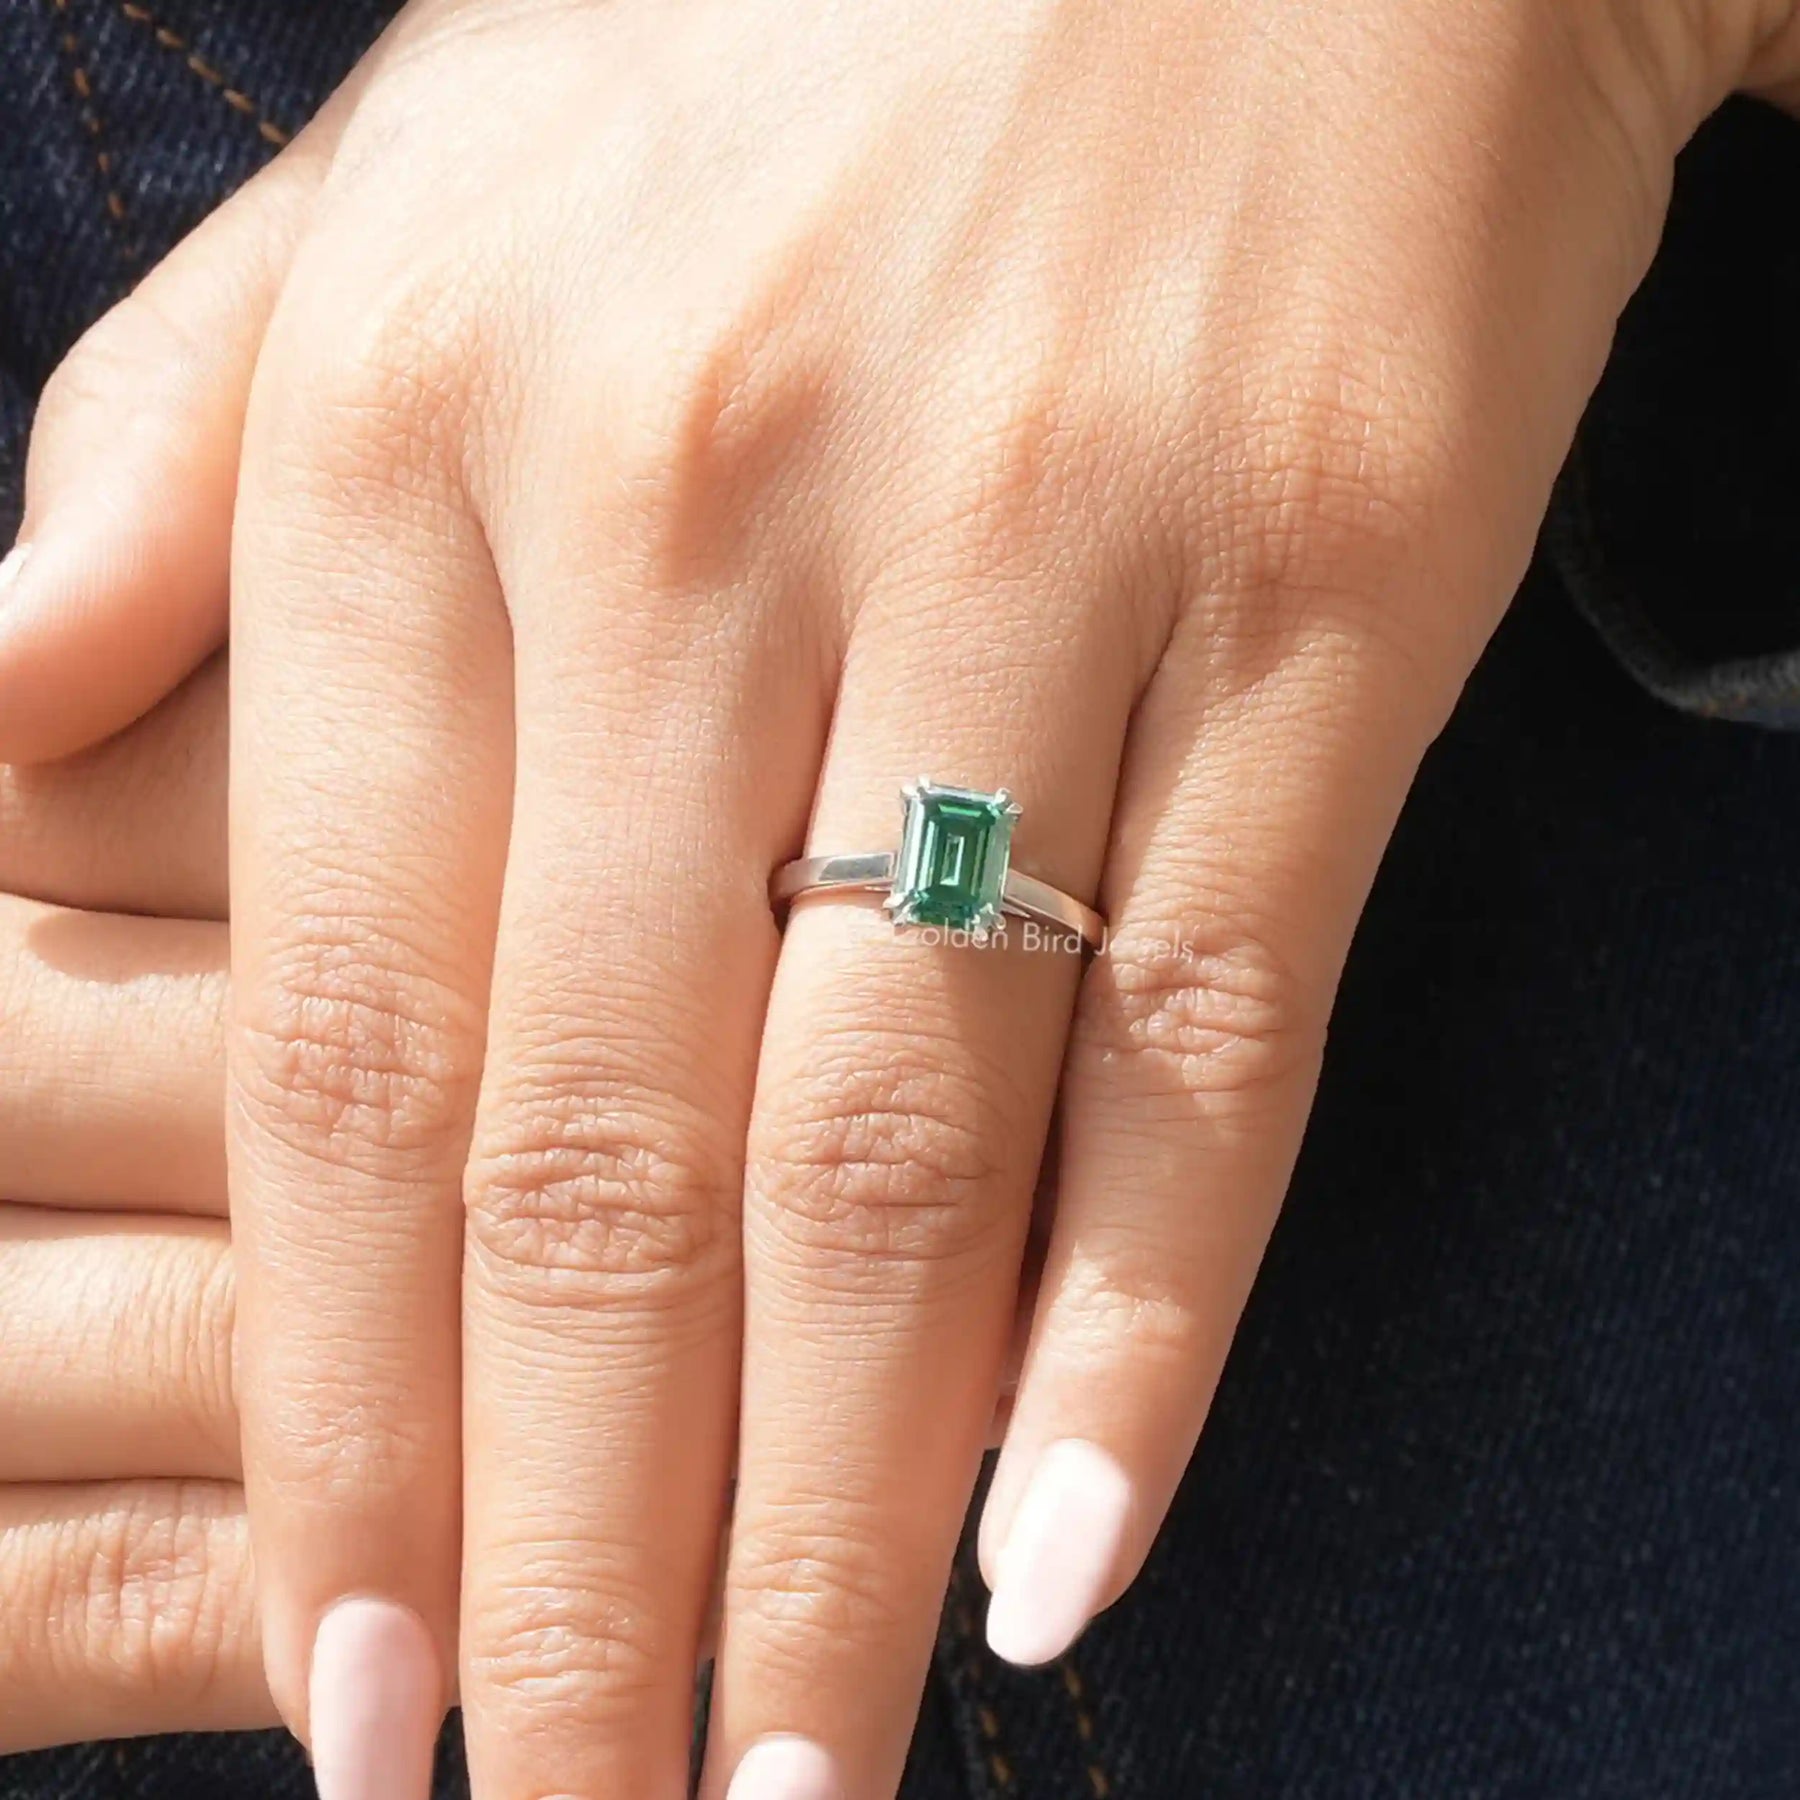 [White Gold Emerald Cut Moissanite Solitaire Ring]-[Golden Bird Jewels]